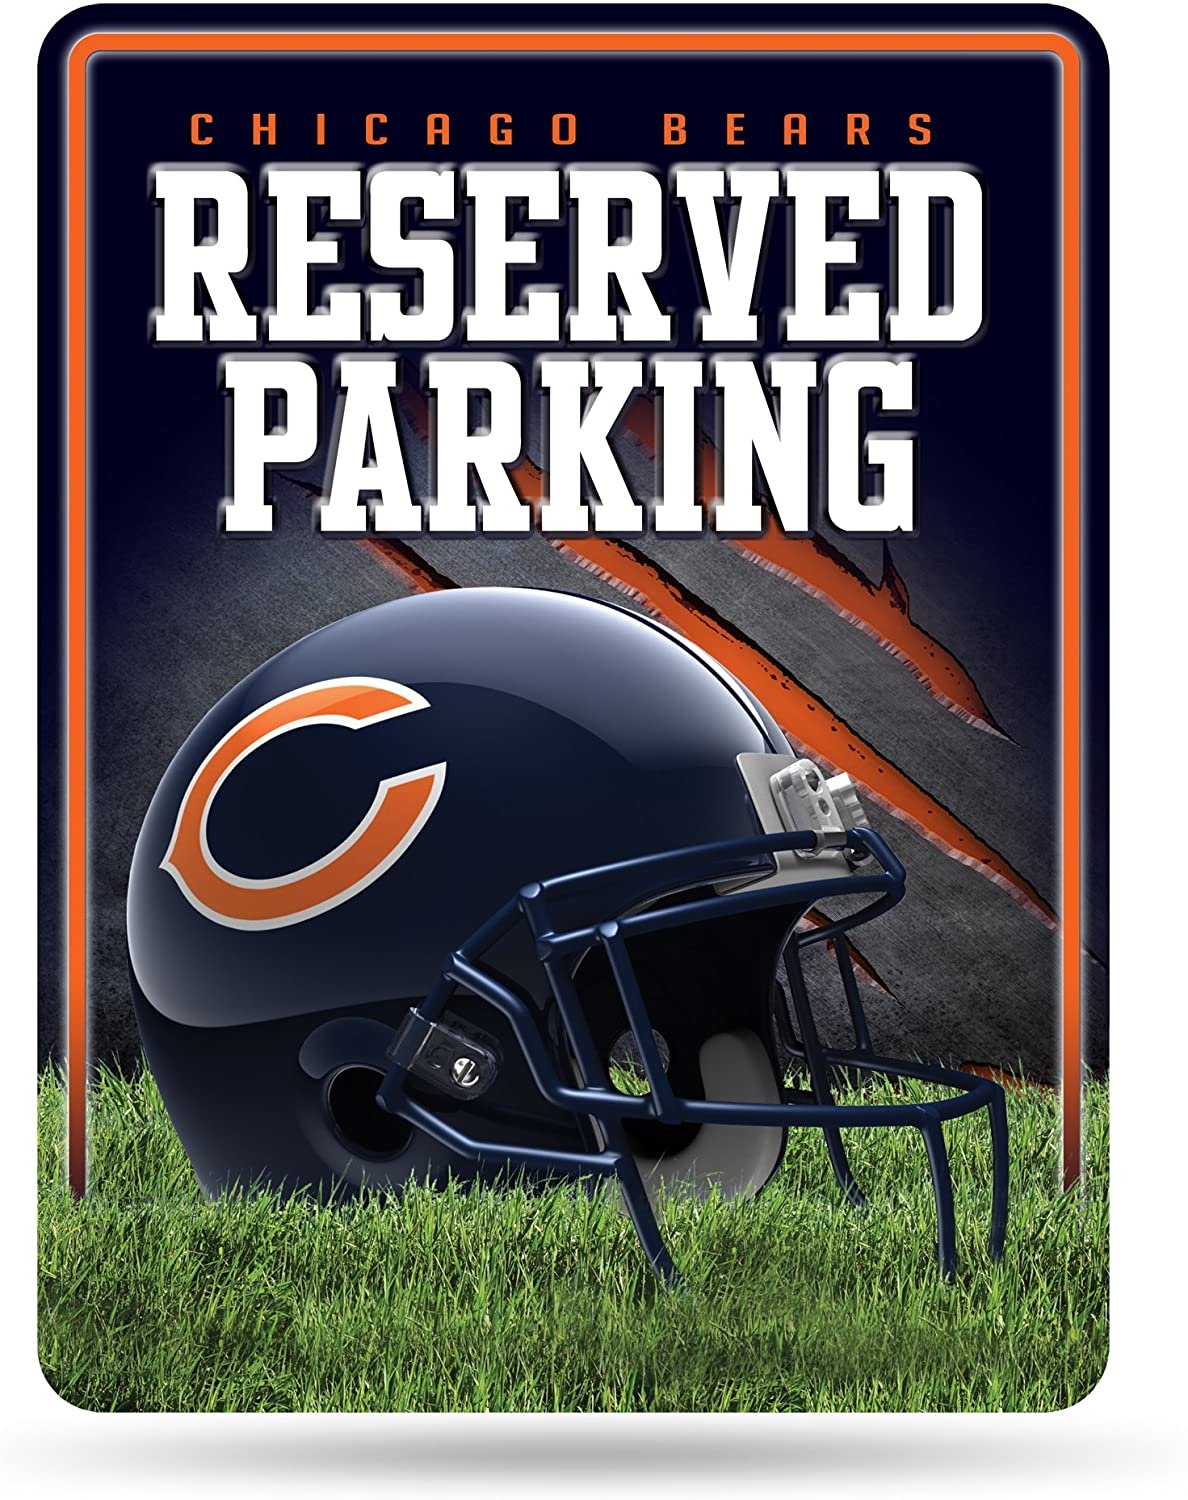 Chicago Bears Metal Parking Sign